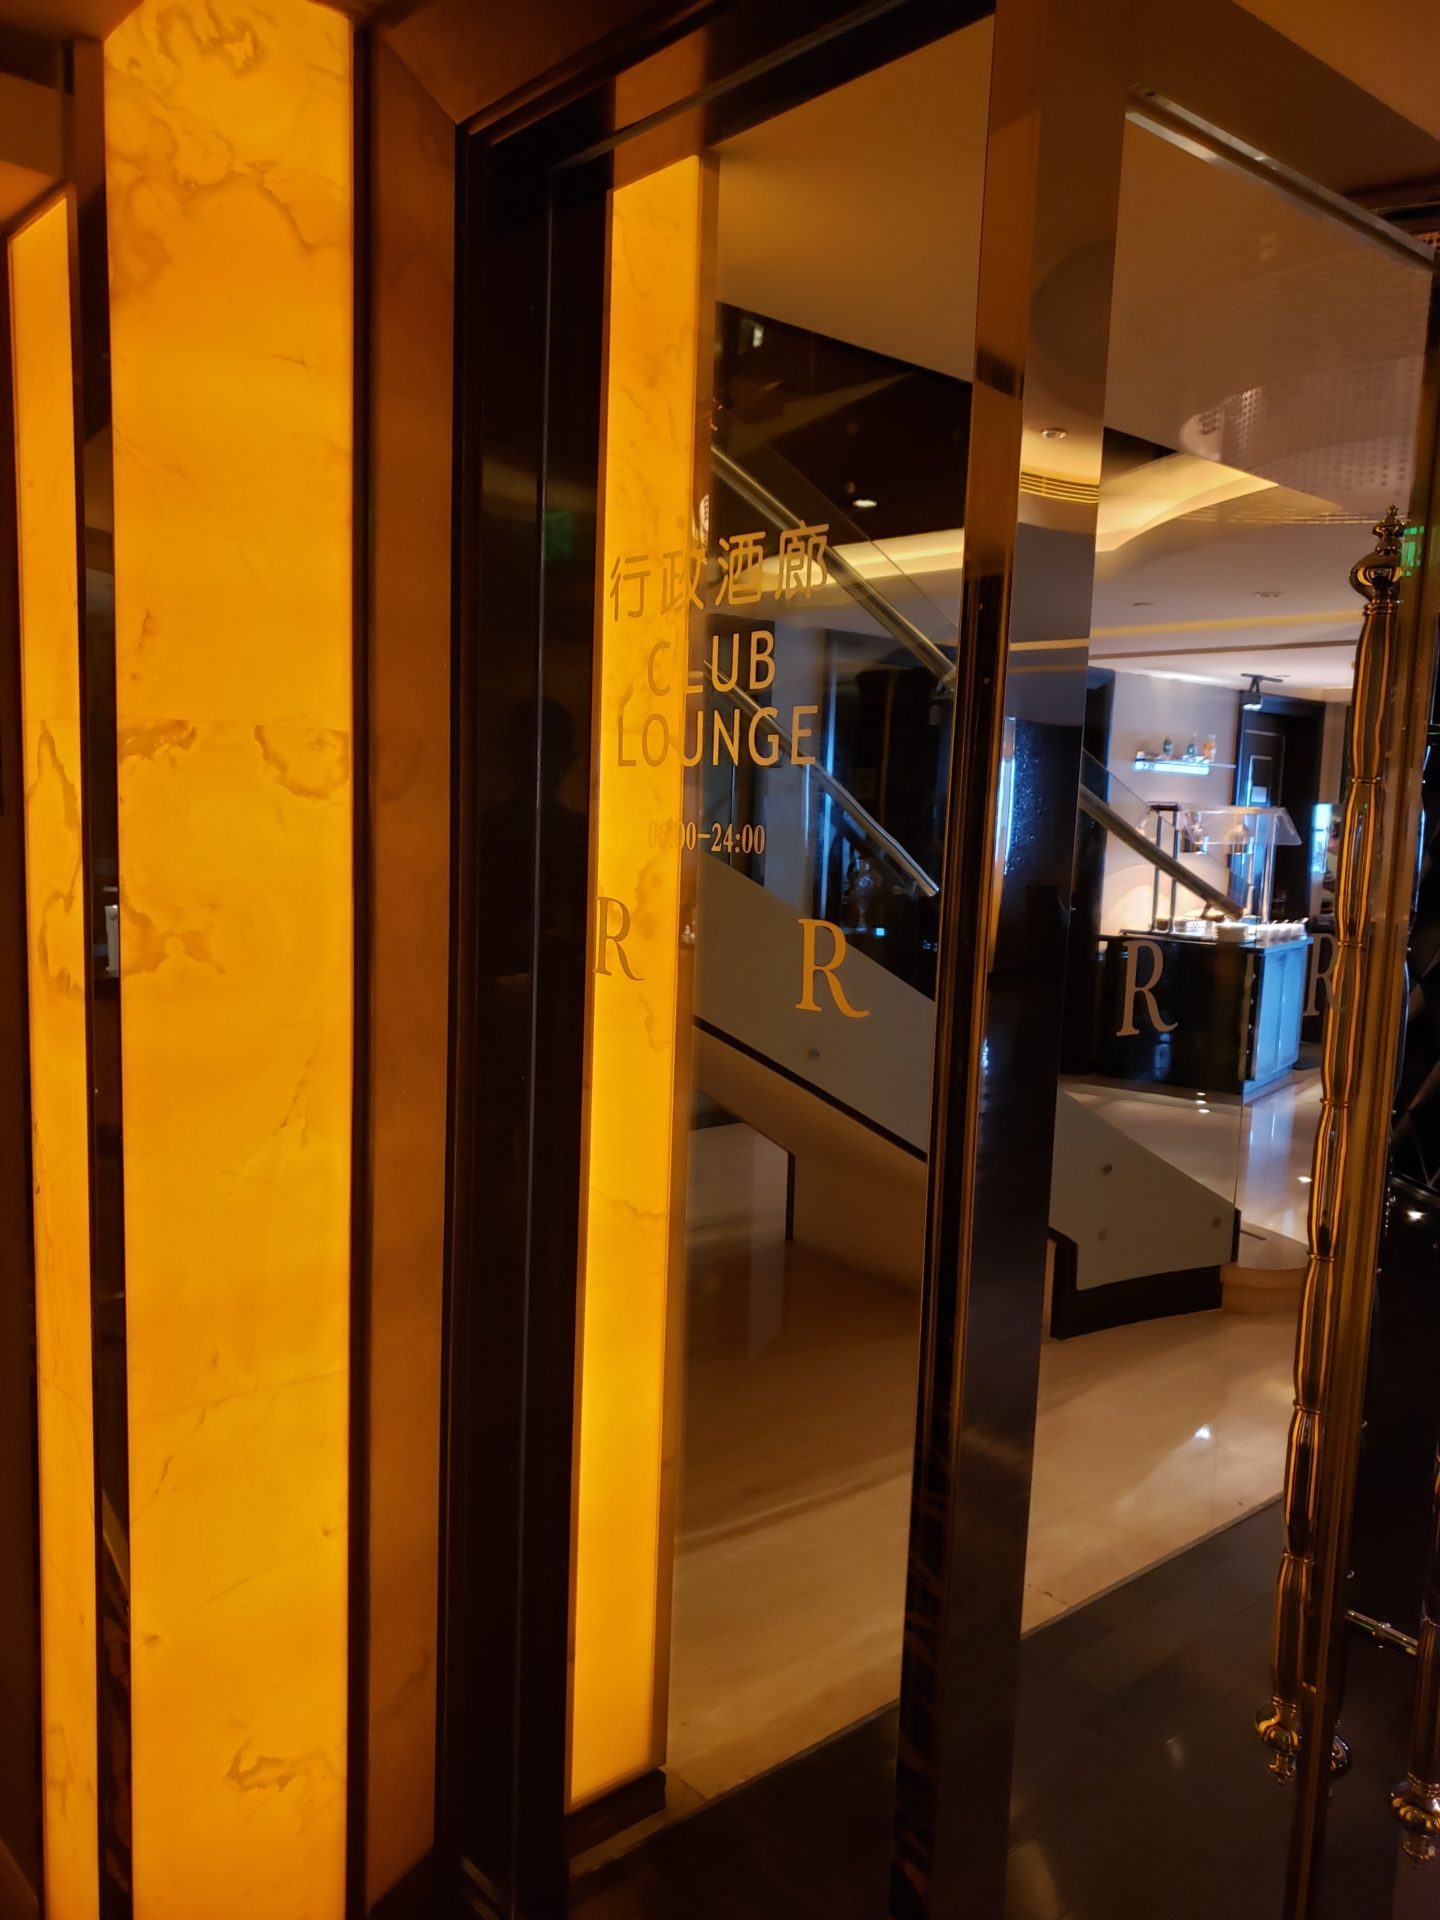 a glass door with gold and black text